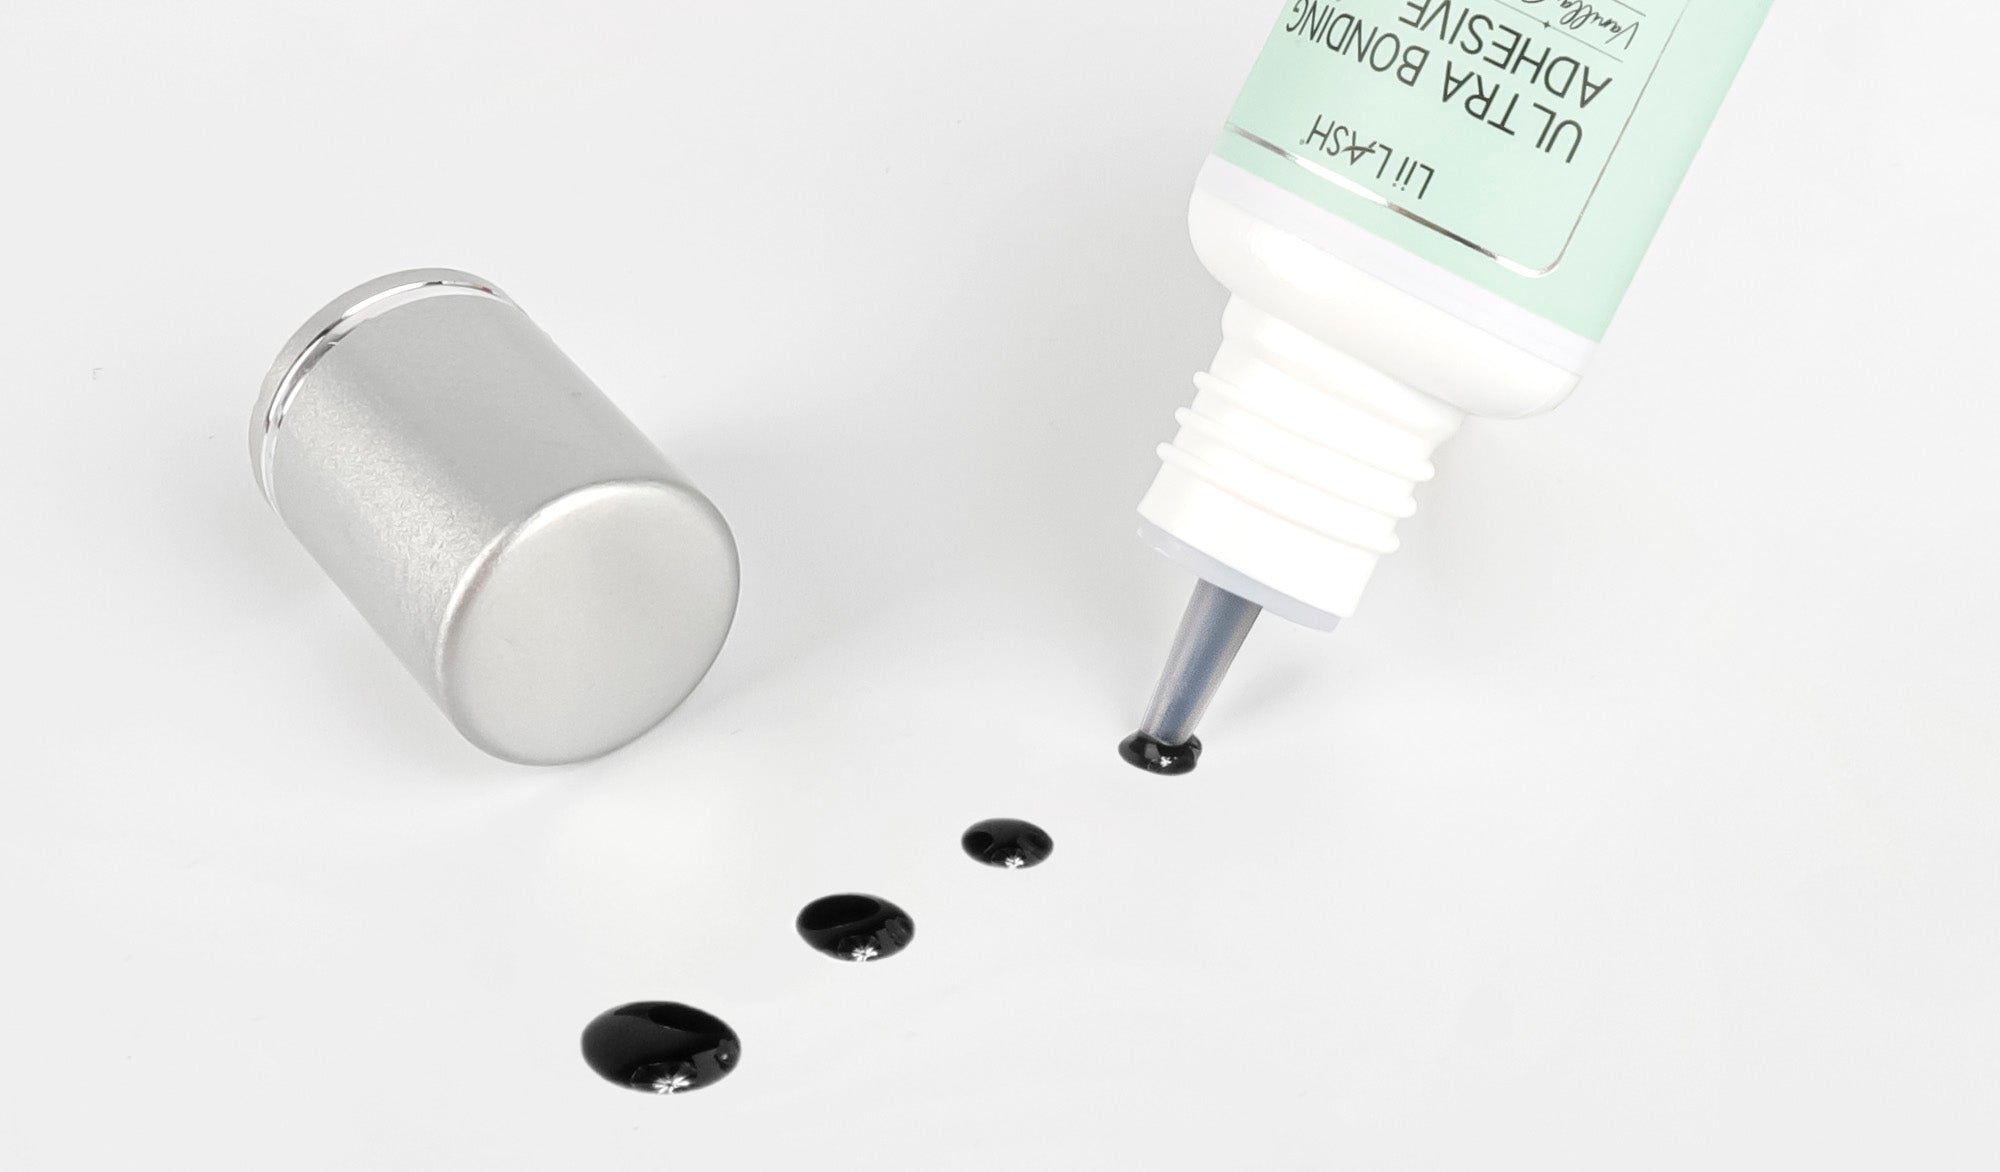 Close-up image of lash adhesive, a crucial element in eyelash extension application, with a focus on the precise applicator tip and product details